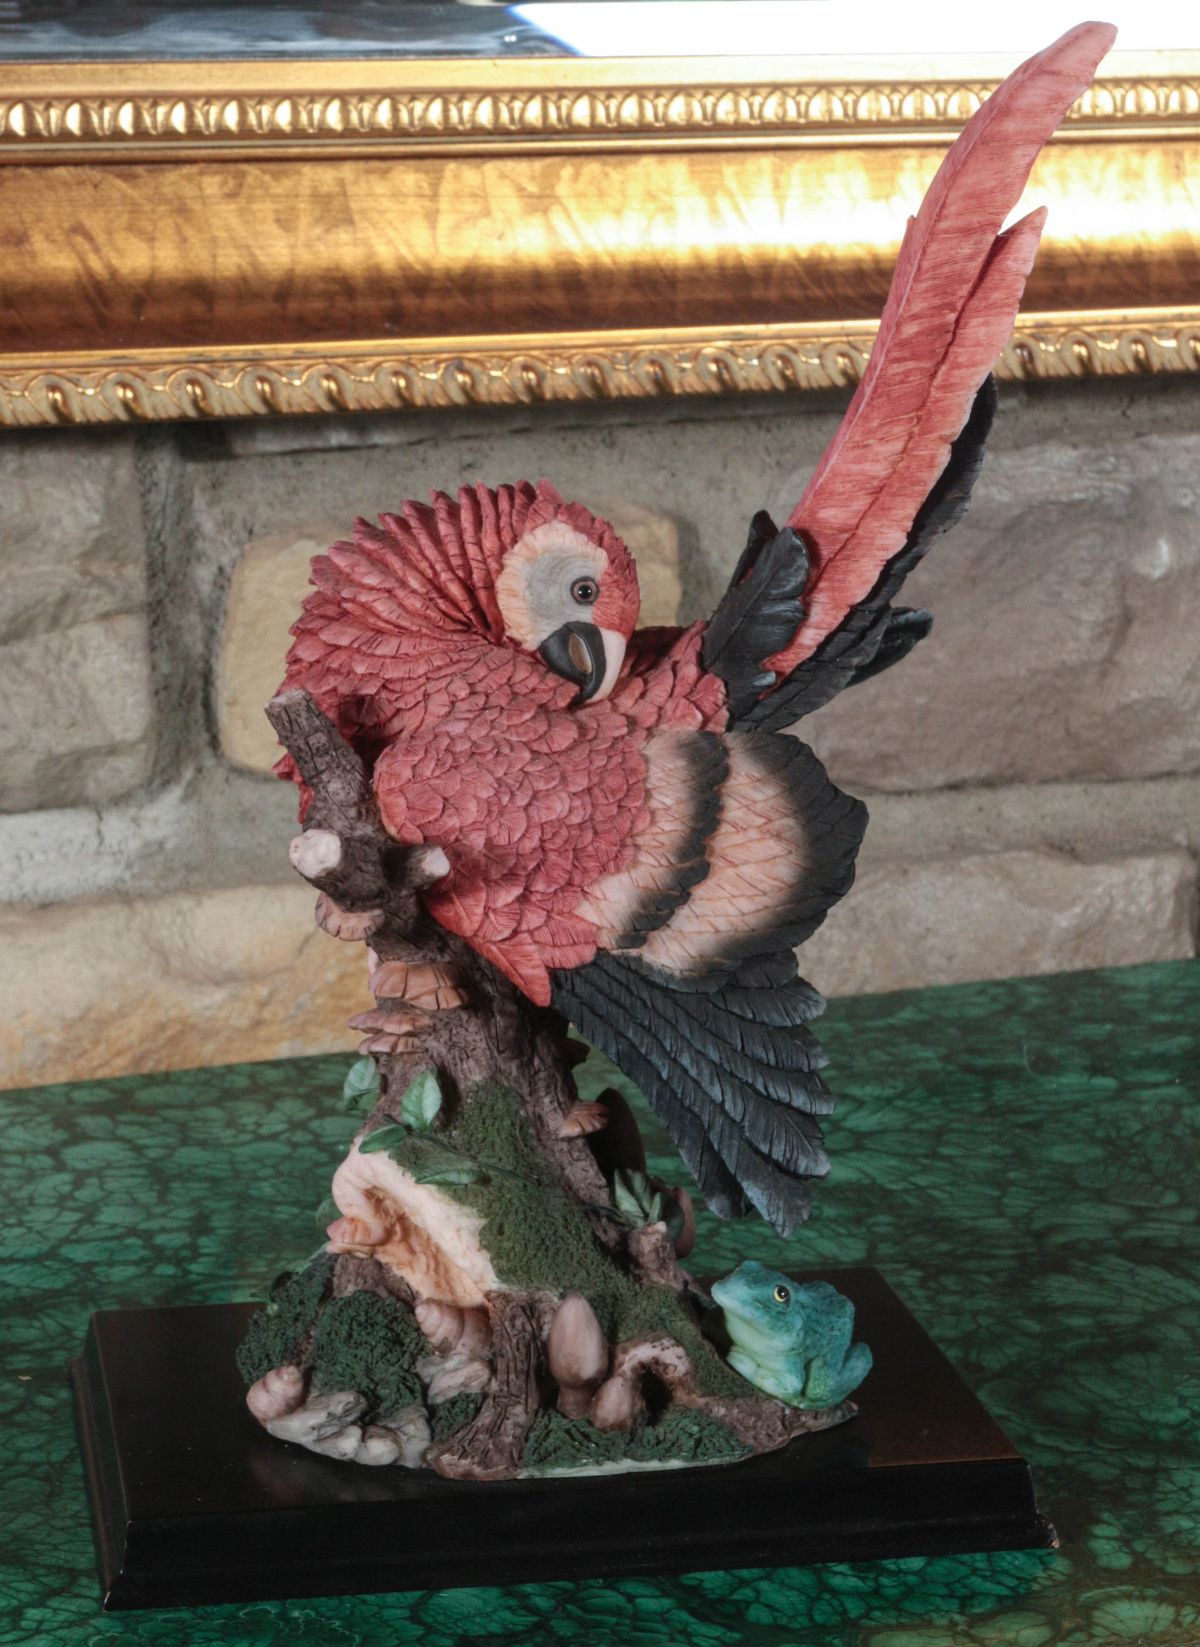 A POLYCHROME RESIN SCULPTURE OF A PARROT